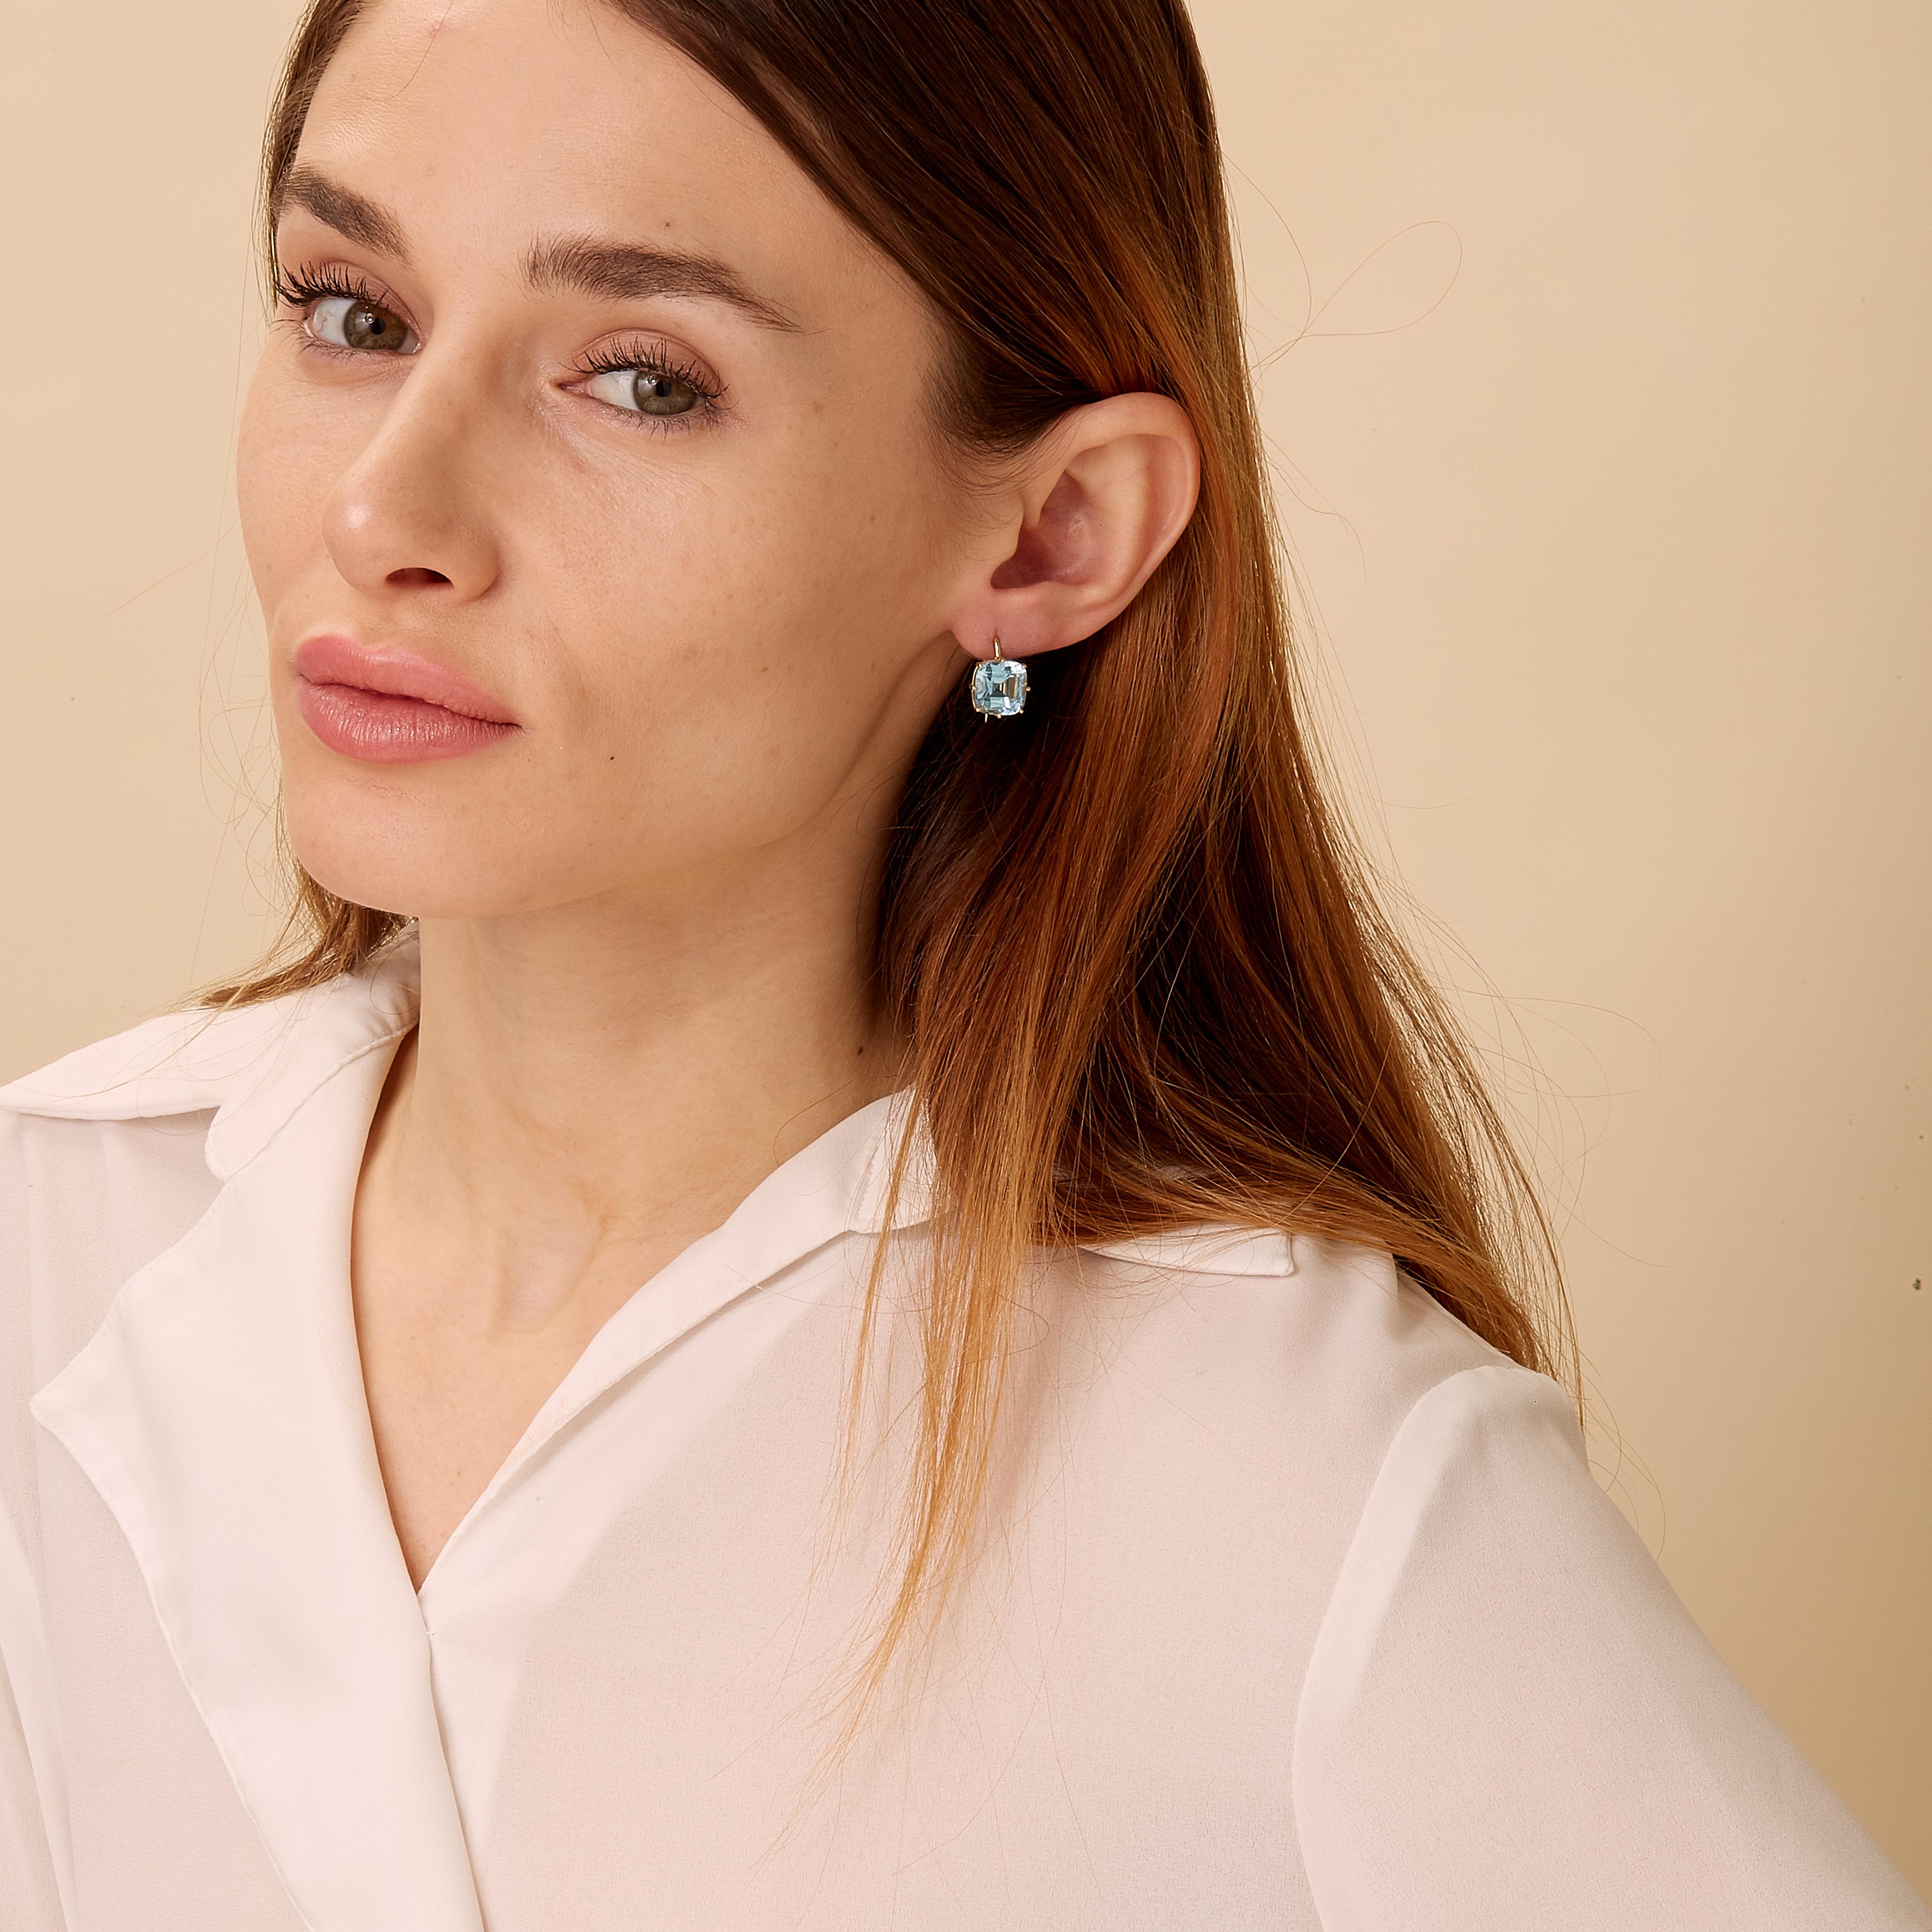 Created in 18 karat yellow gold
Blue Topaz 10 cts approx
Limited Edition

Exquisite and limited edition, these Candy Blue Topaz and Moon Quartz Earrings are lovingly handcrafted in 18 karat yellow gold. With a subtle sparkle from the beautiful blue